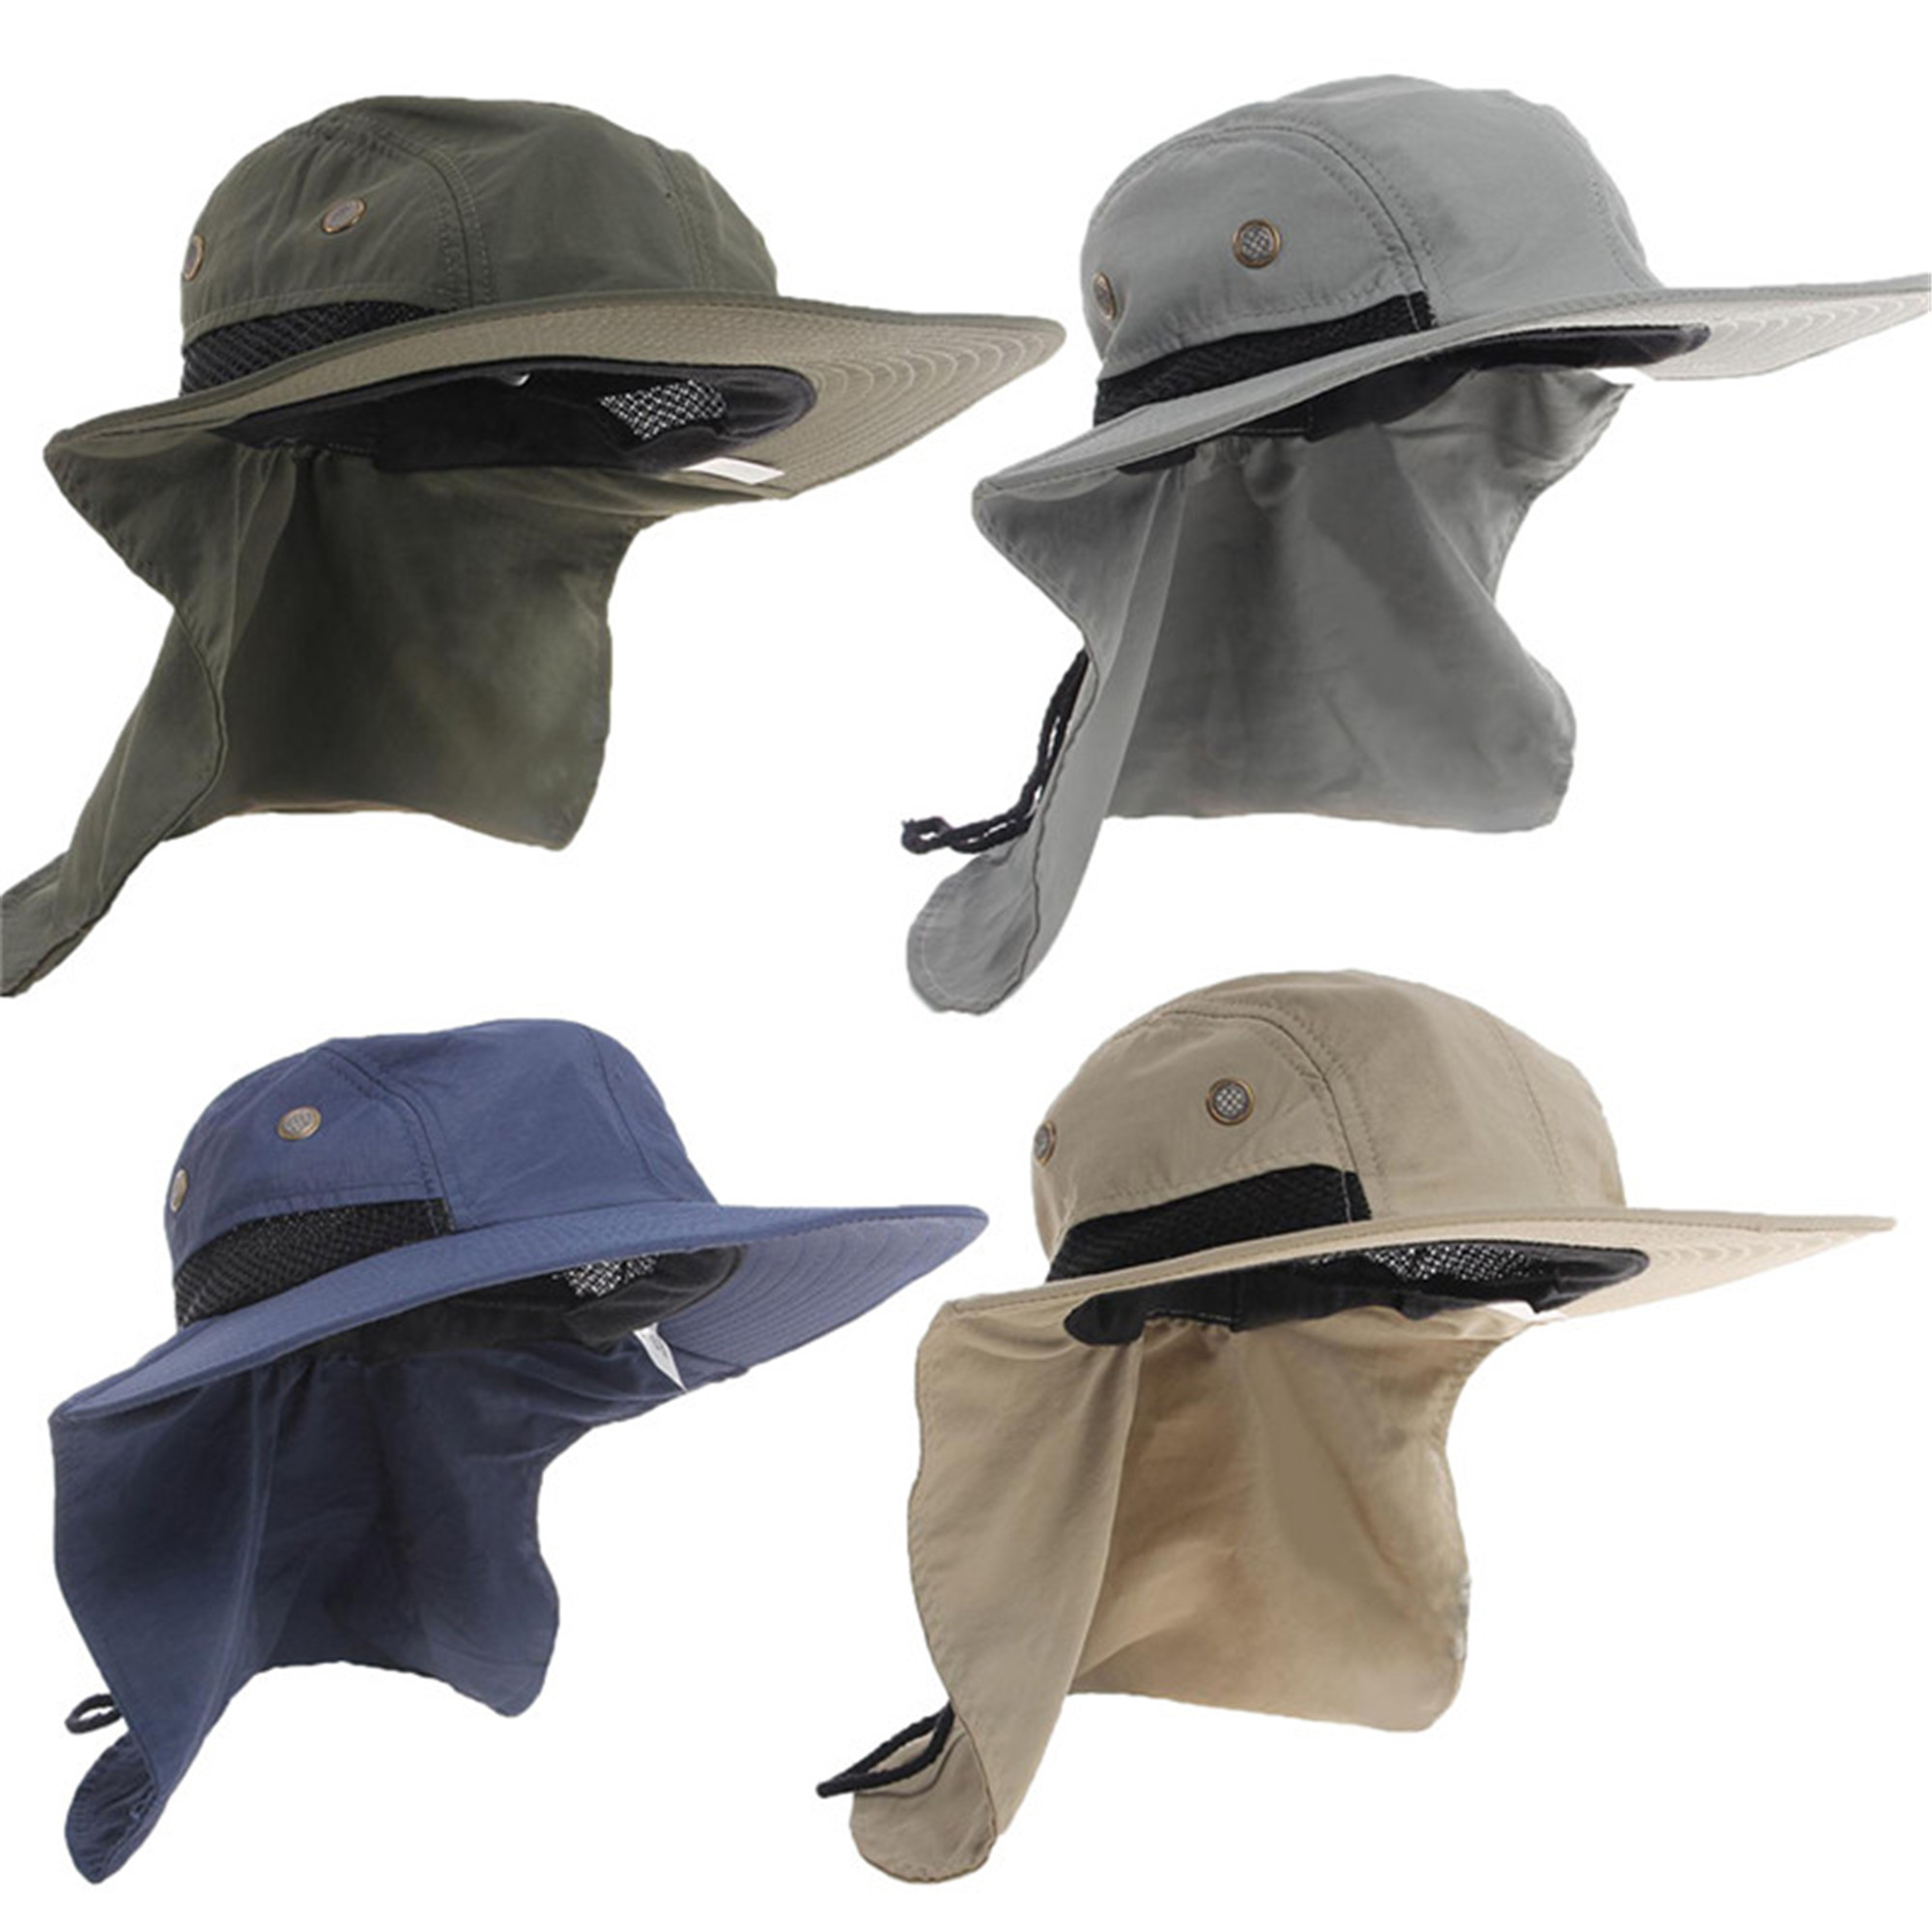 Sunisery Outdoor Fishing Hiking Boonie Snap Hat Brim Ear Neck Cover Sun Flap Cap - image 4 of 4